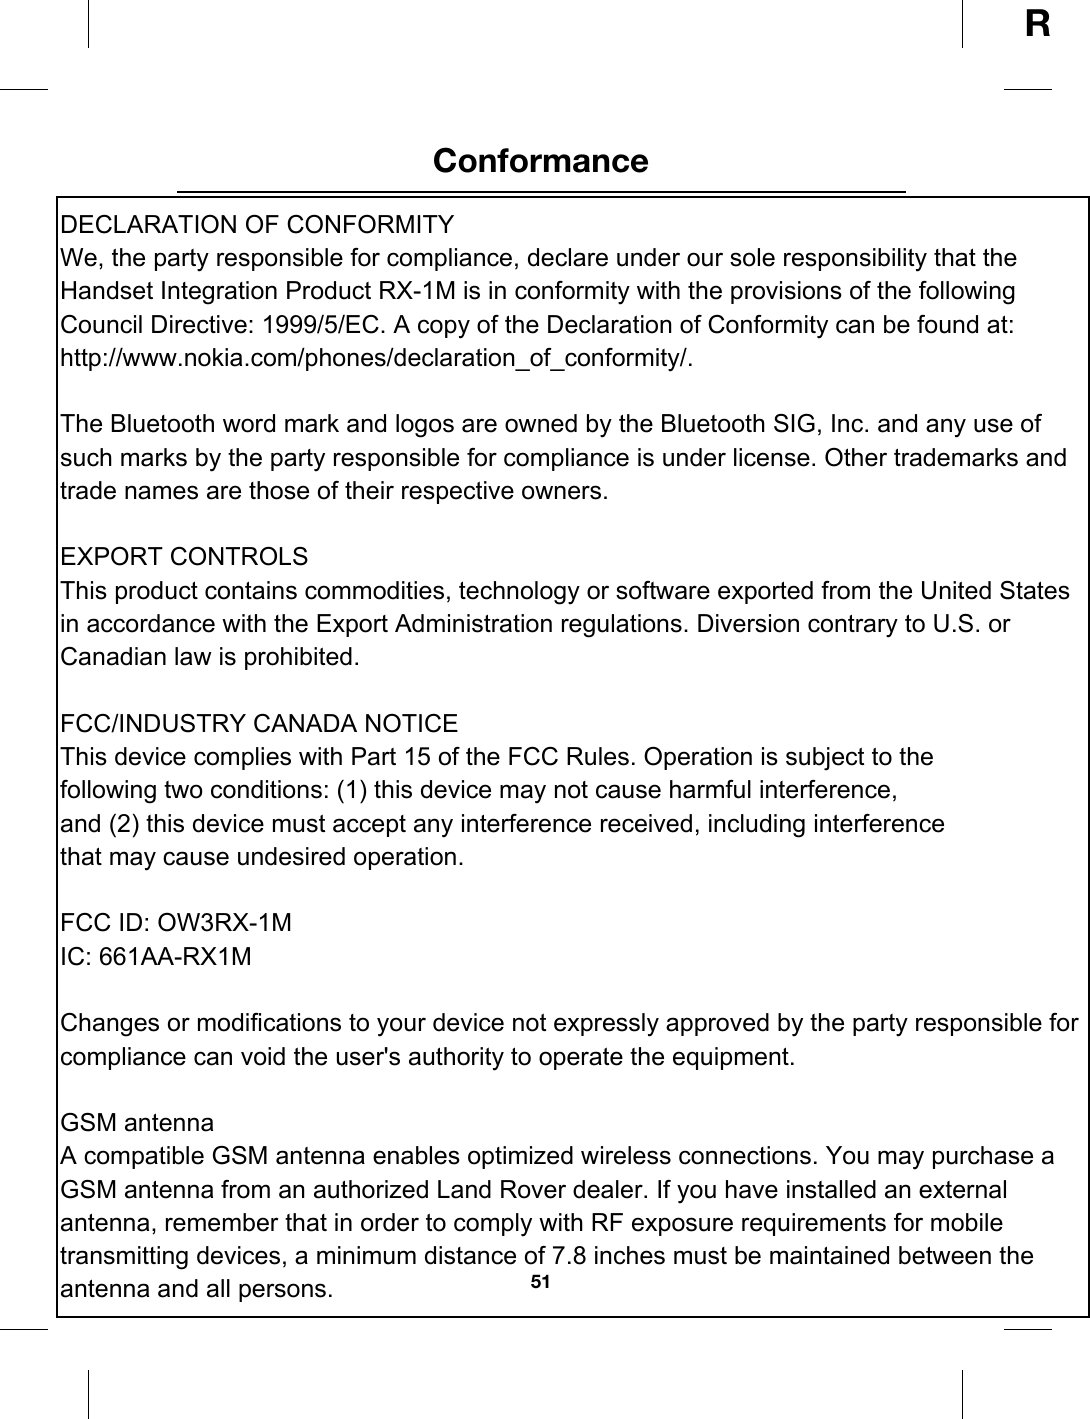 51ConformanceRConforma nceDECLARATION OF CONFORMITYWe, the party responsible for compliance, declare under our sole responsibility that the Handset Integration Product RX-1M is in conformity with the provisions of the following Council Directive: 1999/5/EC. A copy of the Declaration of Conformity can be found at:http://www.nokia.com/phones/declaration_of_conformity/.The Bluetooth word mark and logos are owned by the Bluetooth SIG, Inc. and any use of such marks by the party responsible for compliance is under license. Other trademarks and trade names are those of their respective owners.EXPORT CONTROLSThis product contains commodities, technology or software exported from the United States in accordance with the Export Administration regulations. Diversion contrary to U.S. or Canadian law is prohibited.FCC/INDUSTRY CANADA NOTICEThis device complies with Part 15 of the FCC Rules. Operation is subject to thefollowing two conditions: (1) this device may not cause harmful interference,and (2) this device must accept any interference received, including interferencethat may cause undesired operation. FCC ID: OW3RX-1MIC: 661AA-RX1MChanges or modifications to your device not expressly approved by the party responsible for compliance can void the user&apos;s authority to operate the equipment.GSM antennaA compatible GSM antenna enables optimized wireless connections. You may purchase a GSM antenna from an authorized Land Rover dealer. If you have installed an external antenna, remember that in order to comply with RF exposure requirements for mobile transmitting devices, a minimum distance of 7.8 inches must be maintained between theantenna and all persons.